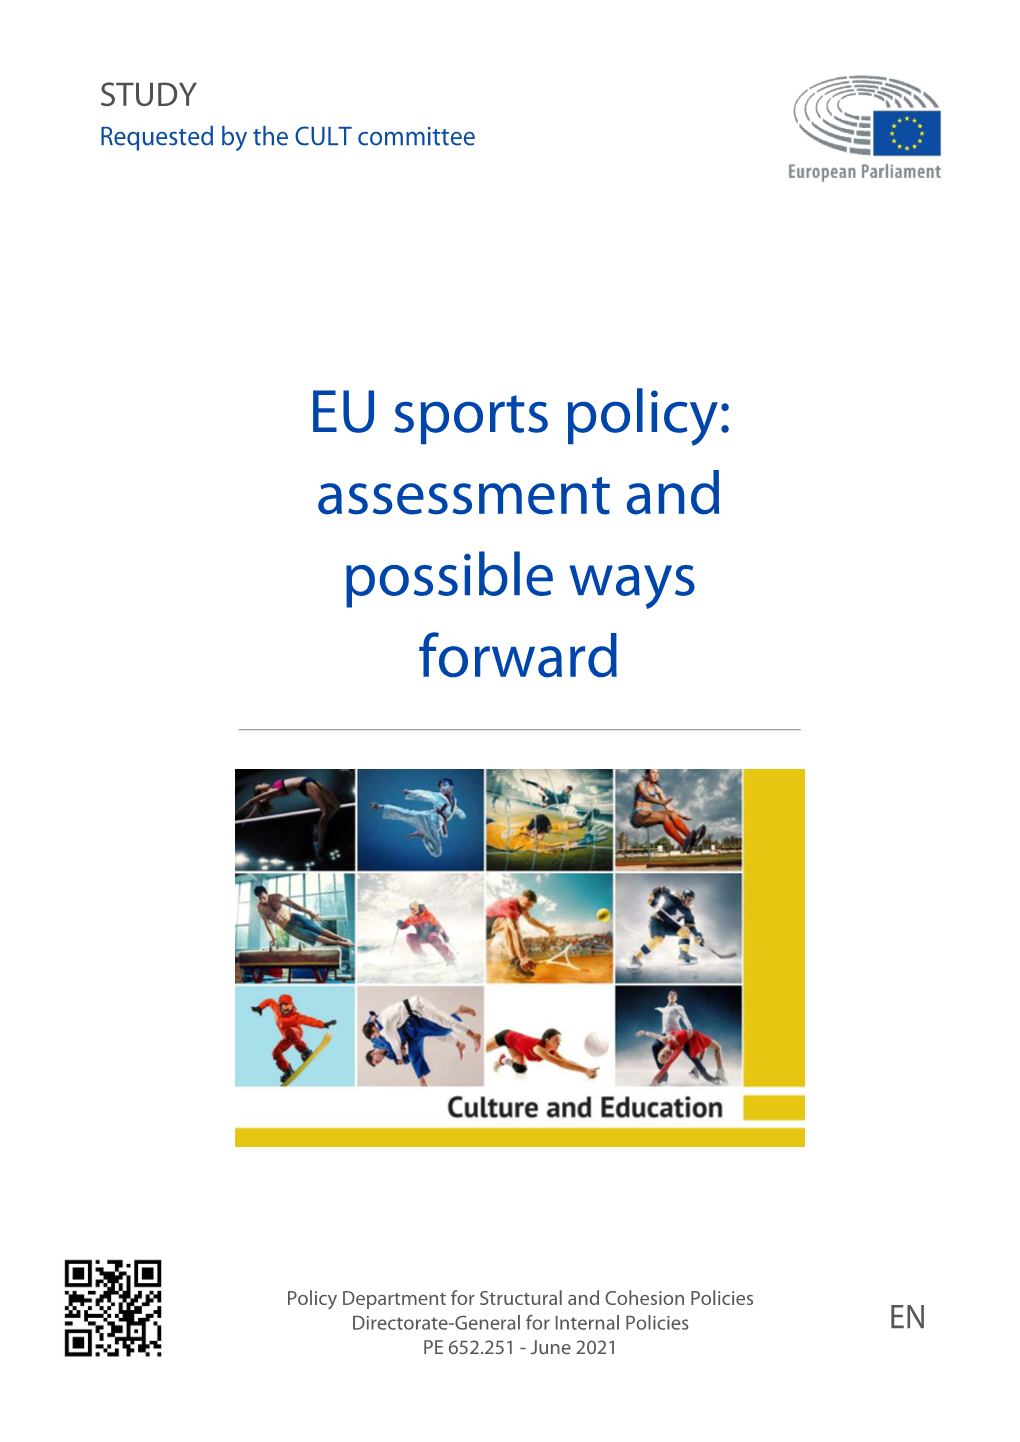 Study on “EU Sports Policy: Assessment and Possible Ways Forward”